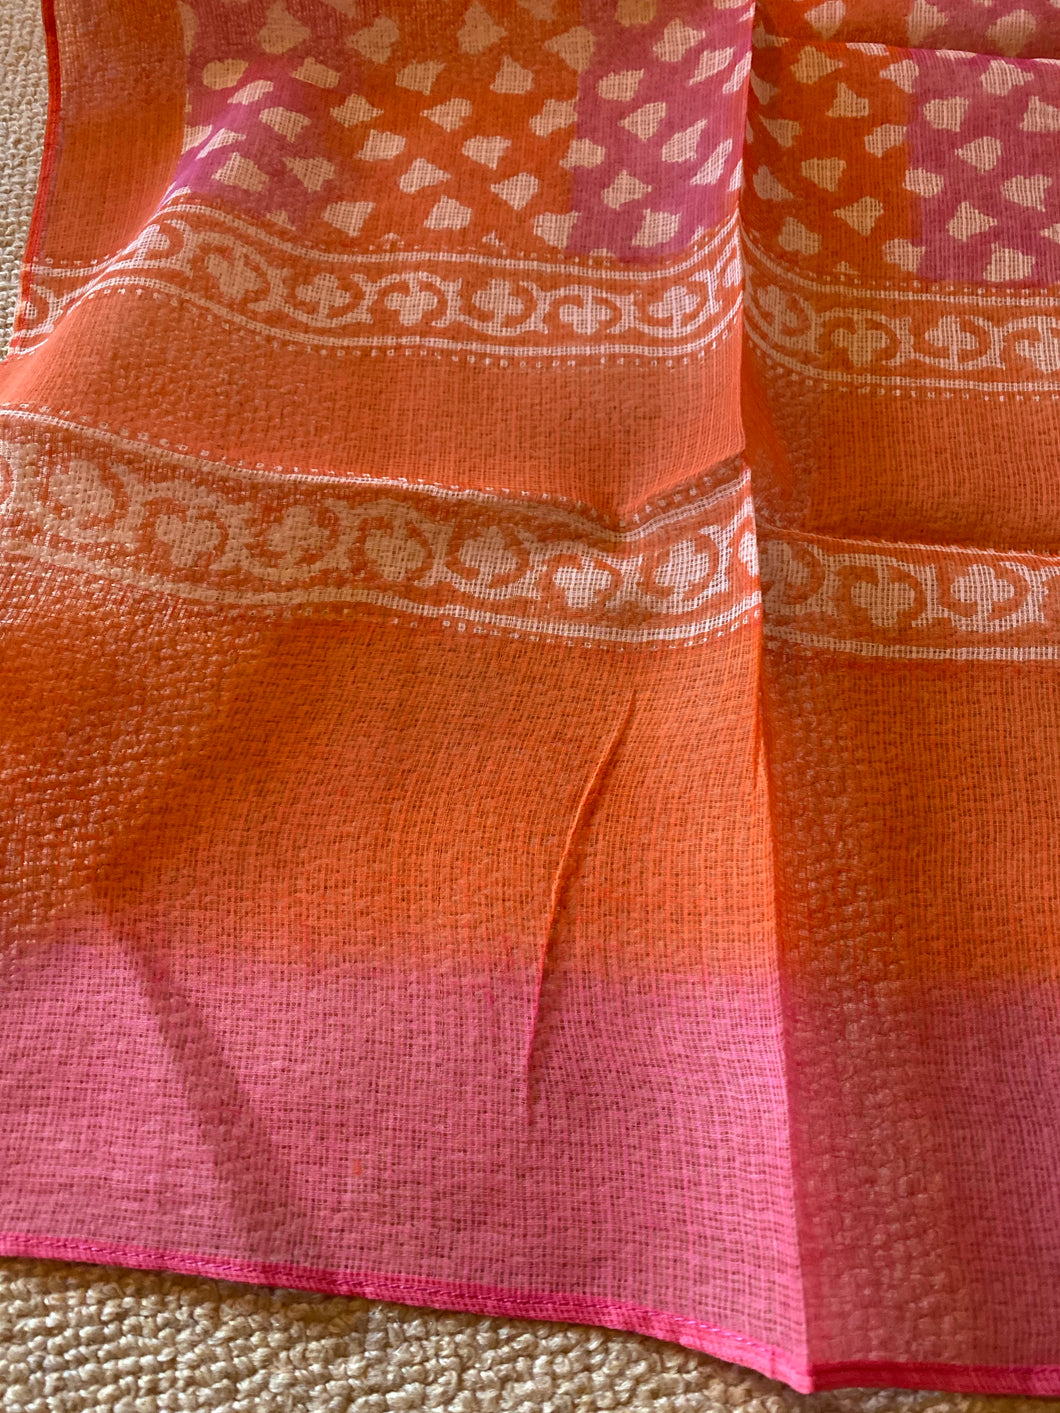 SP120 Simply brilliant, geranium red and pink, small patterned, crisp cotton scarf